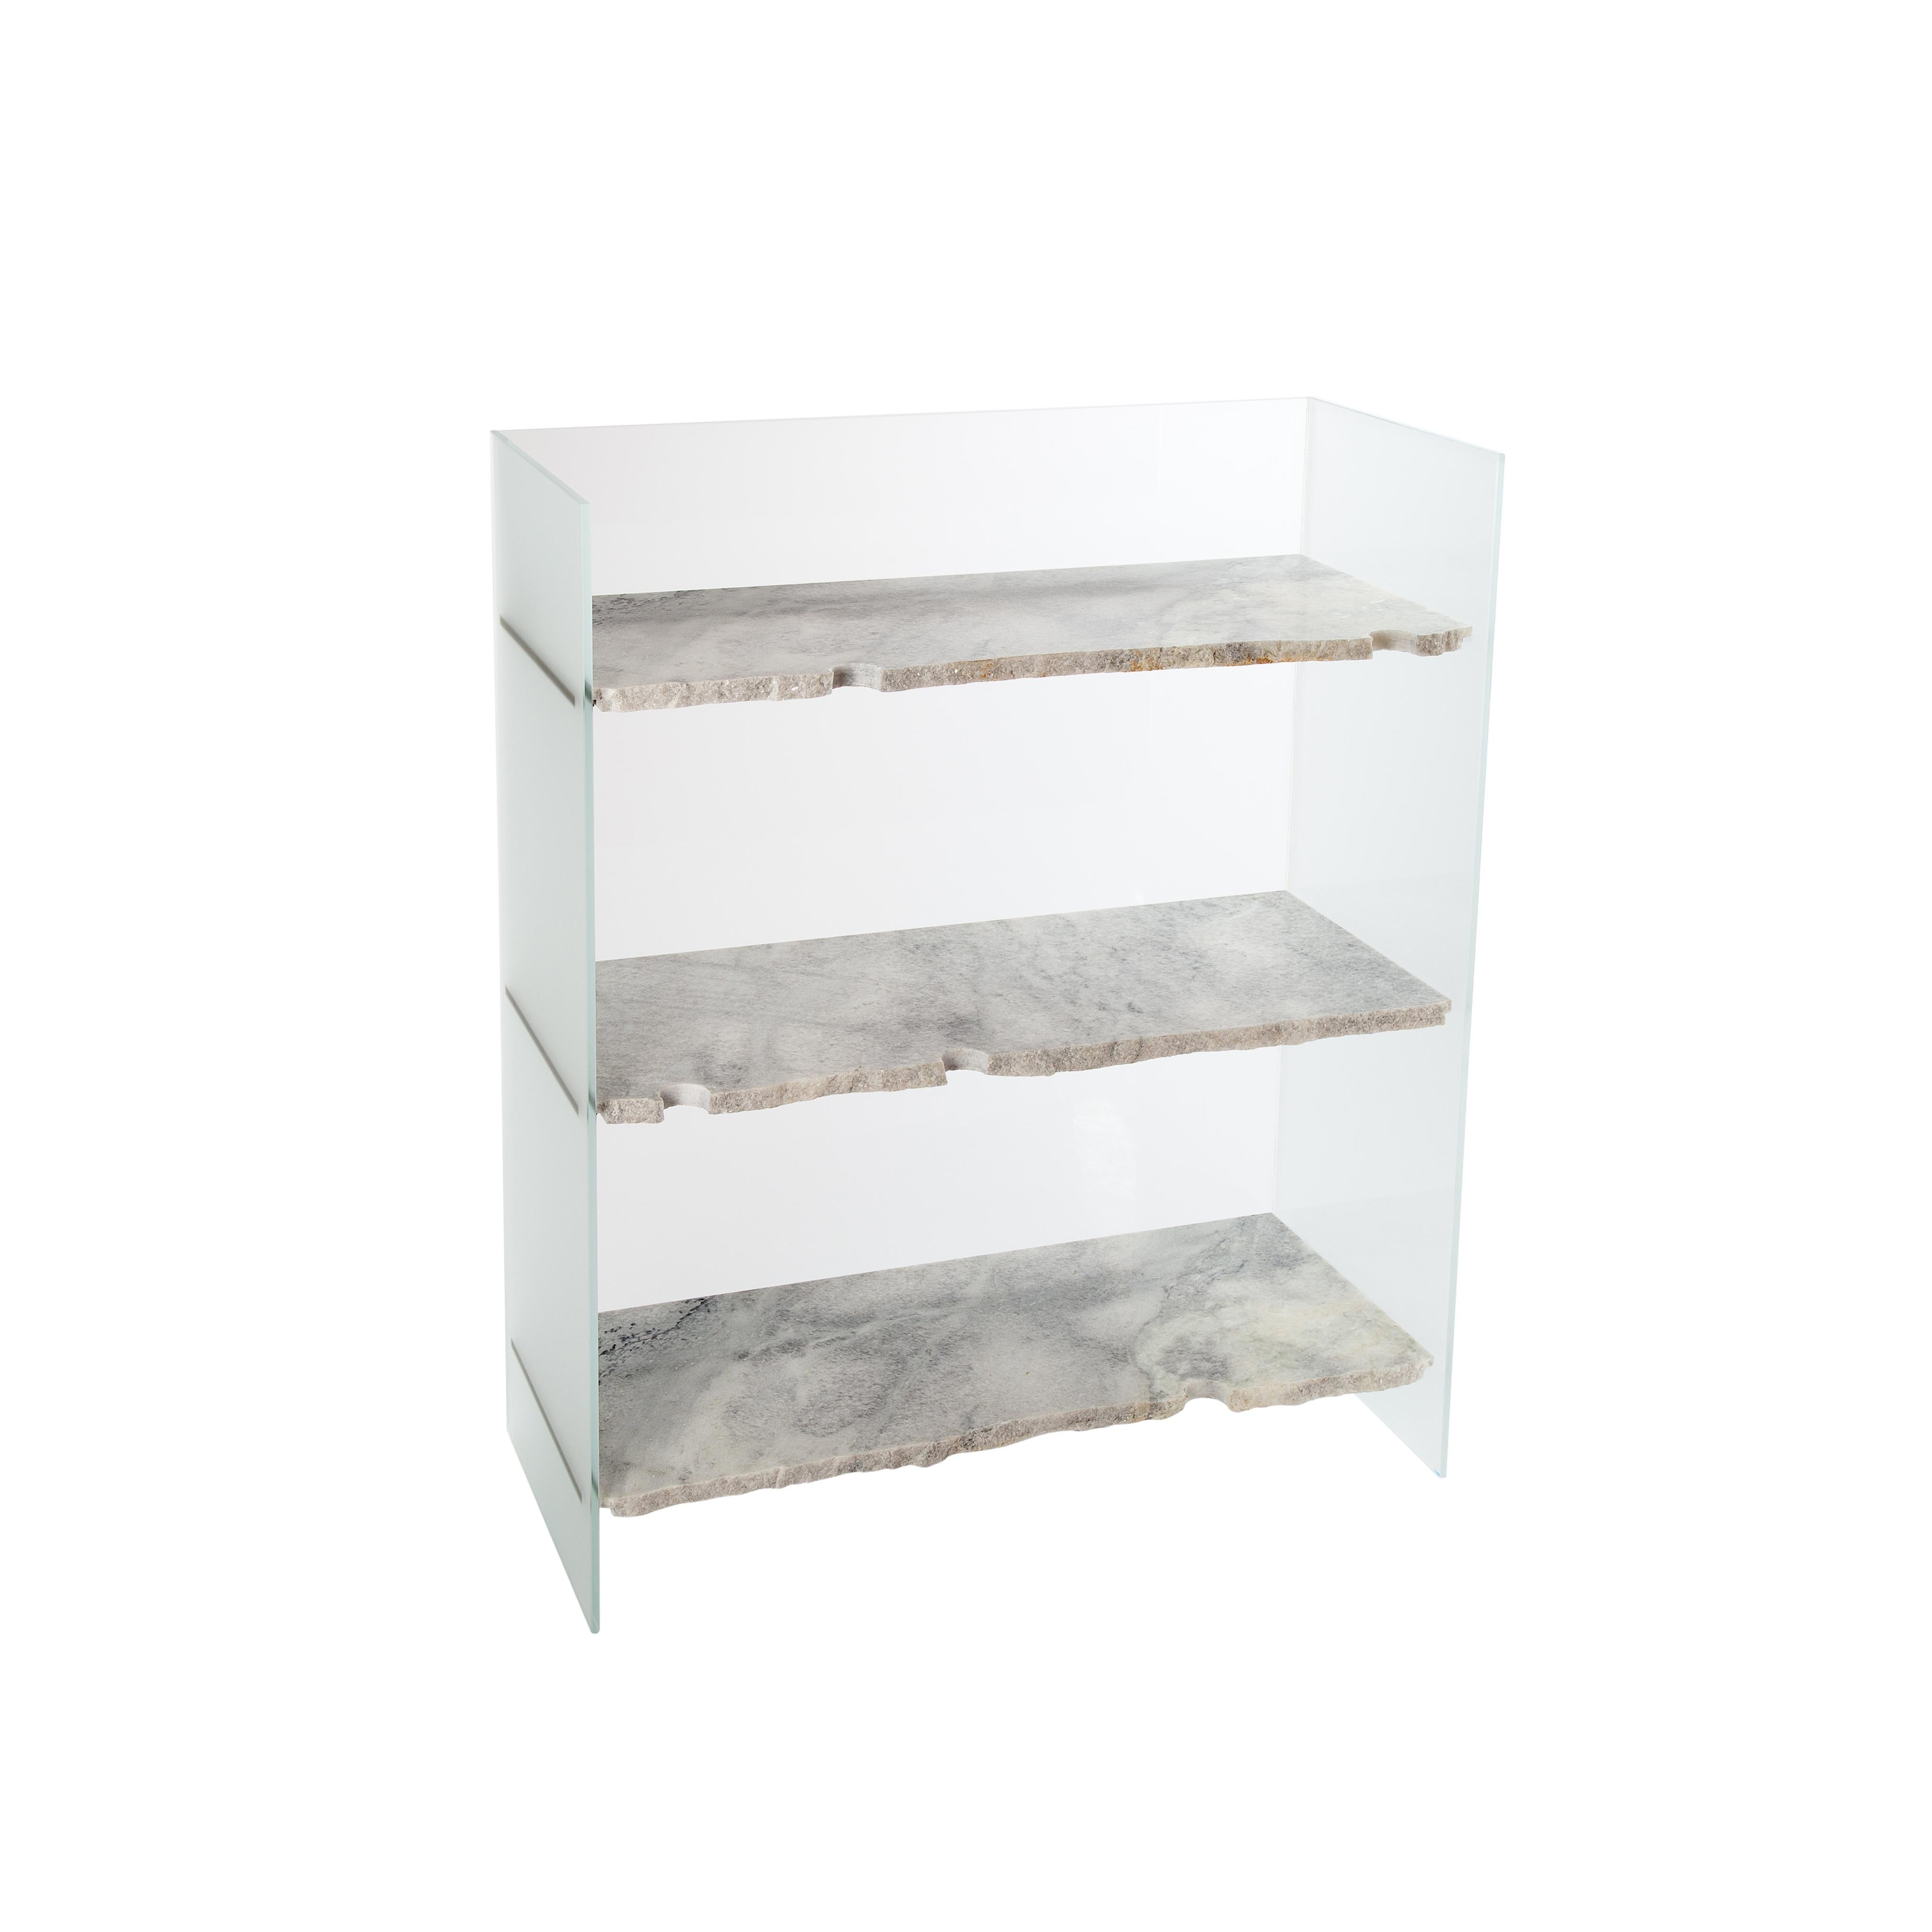 Brut Satinato White Shelves by Pulpo
Dimensions: D80 x W35 x H100 cm
Materials: glass and marble

Also available in different finishes. 

Art Brut: Ferréol Babin’s working method is often that of a sculptor. With brut, he even left the